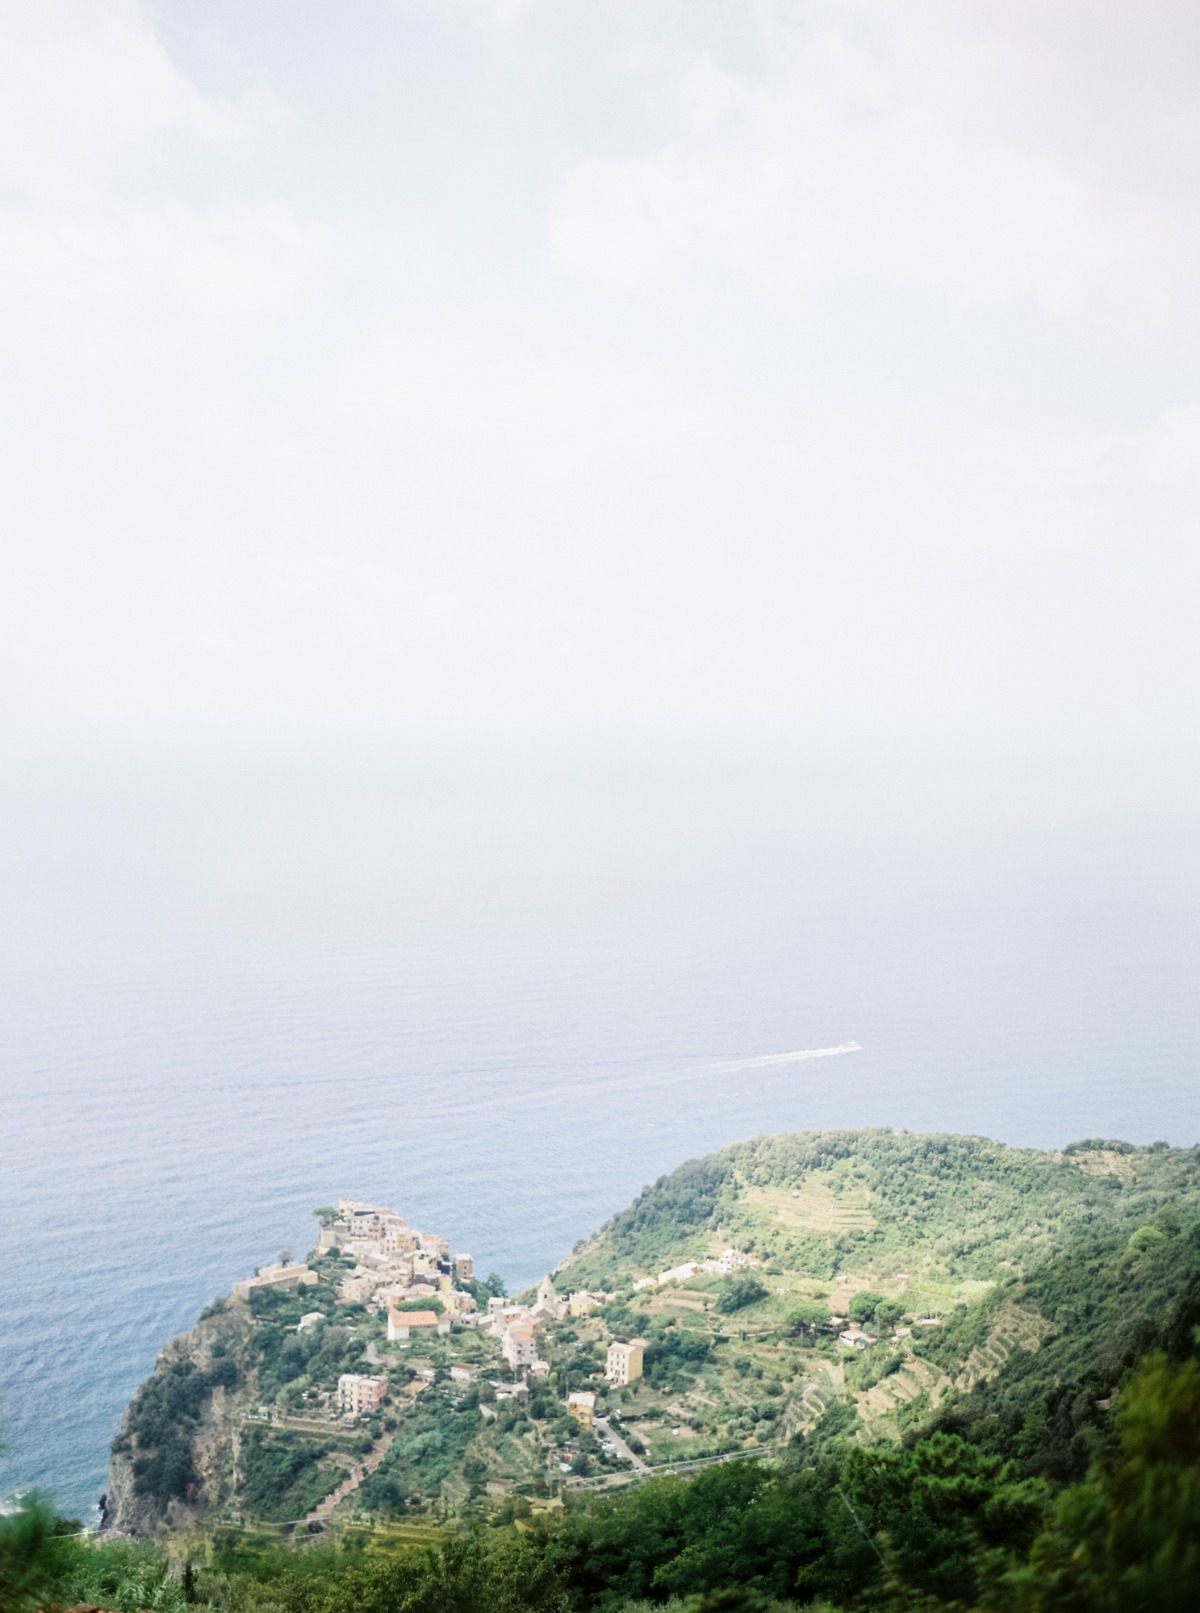 A Picturesque Engagement In Cinque Terre, Tuscany